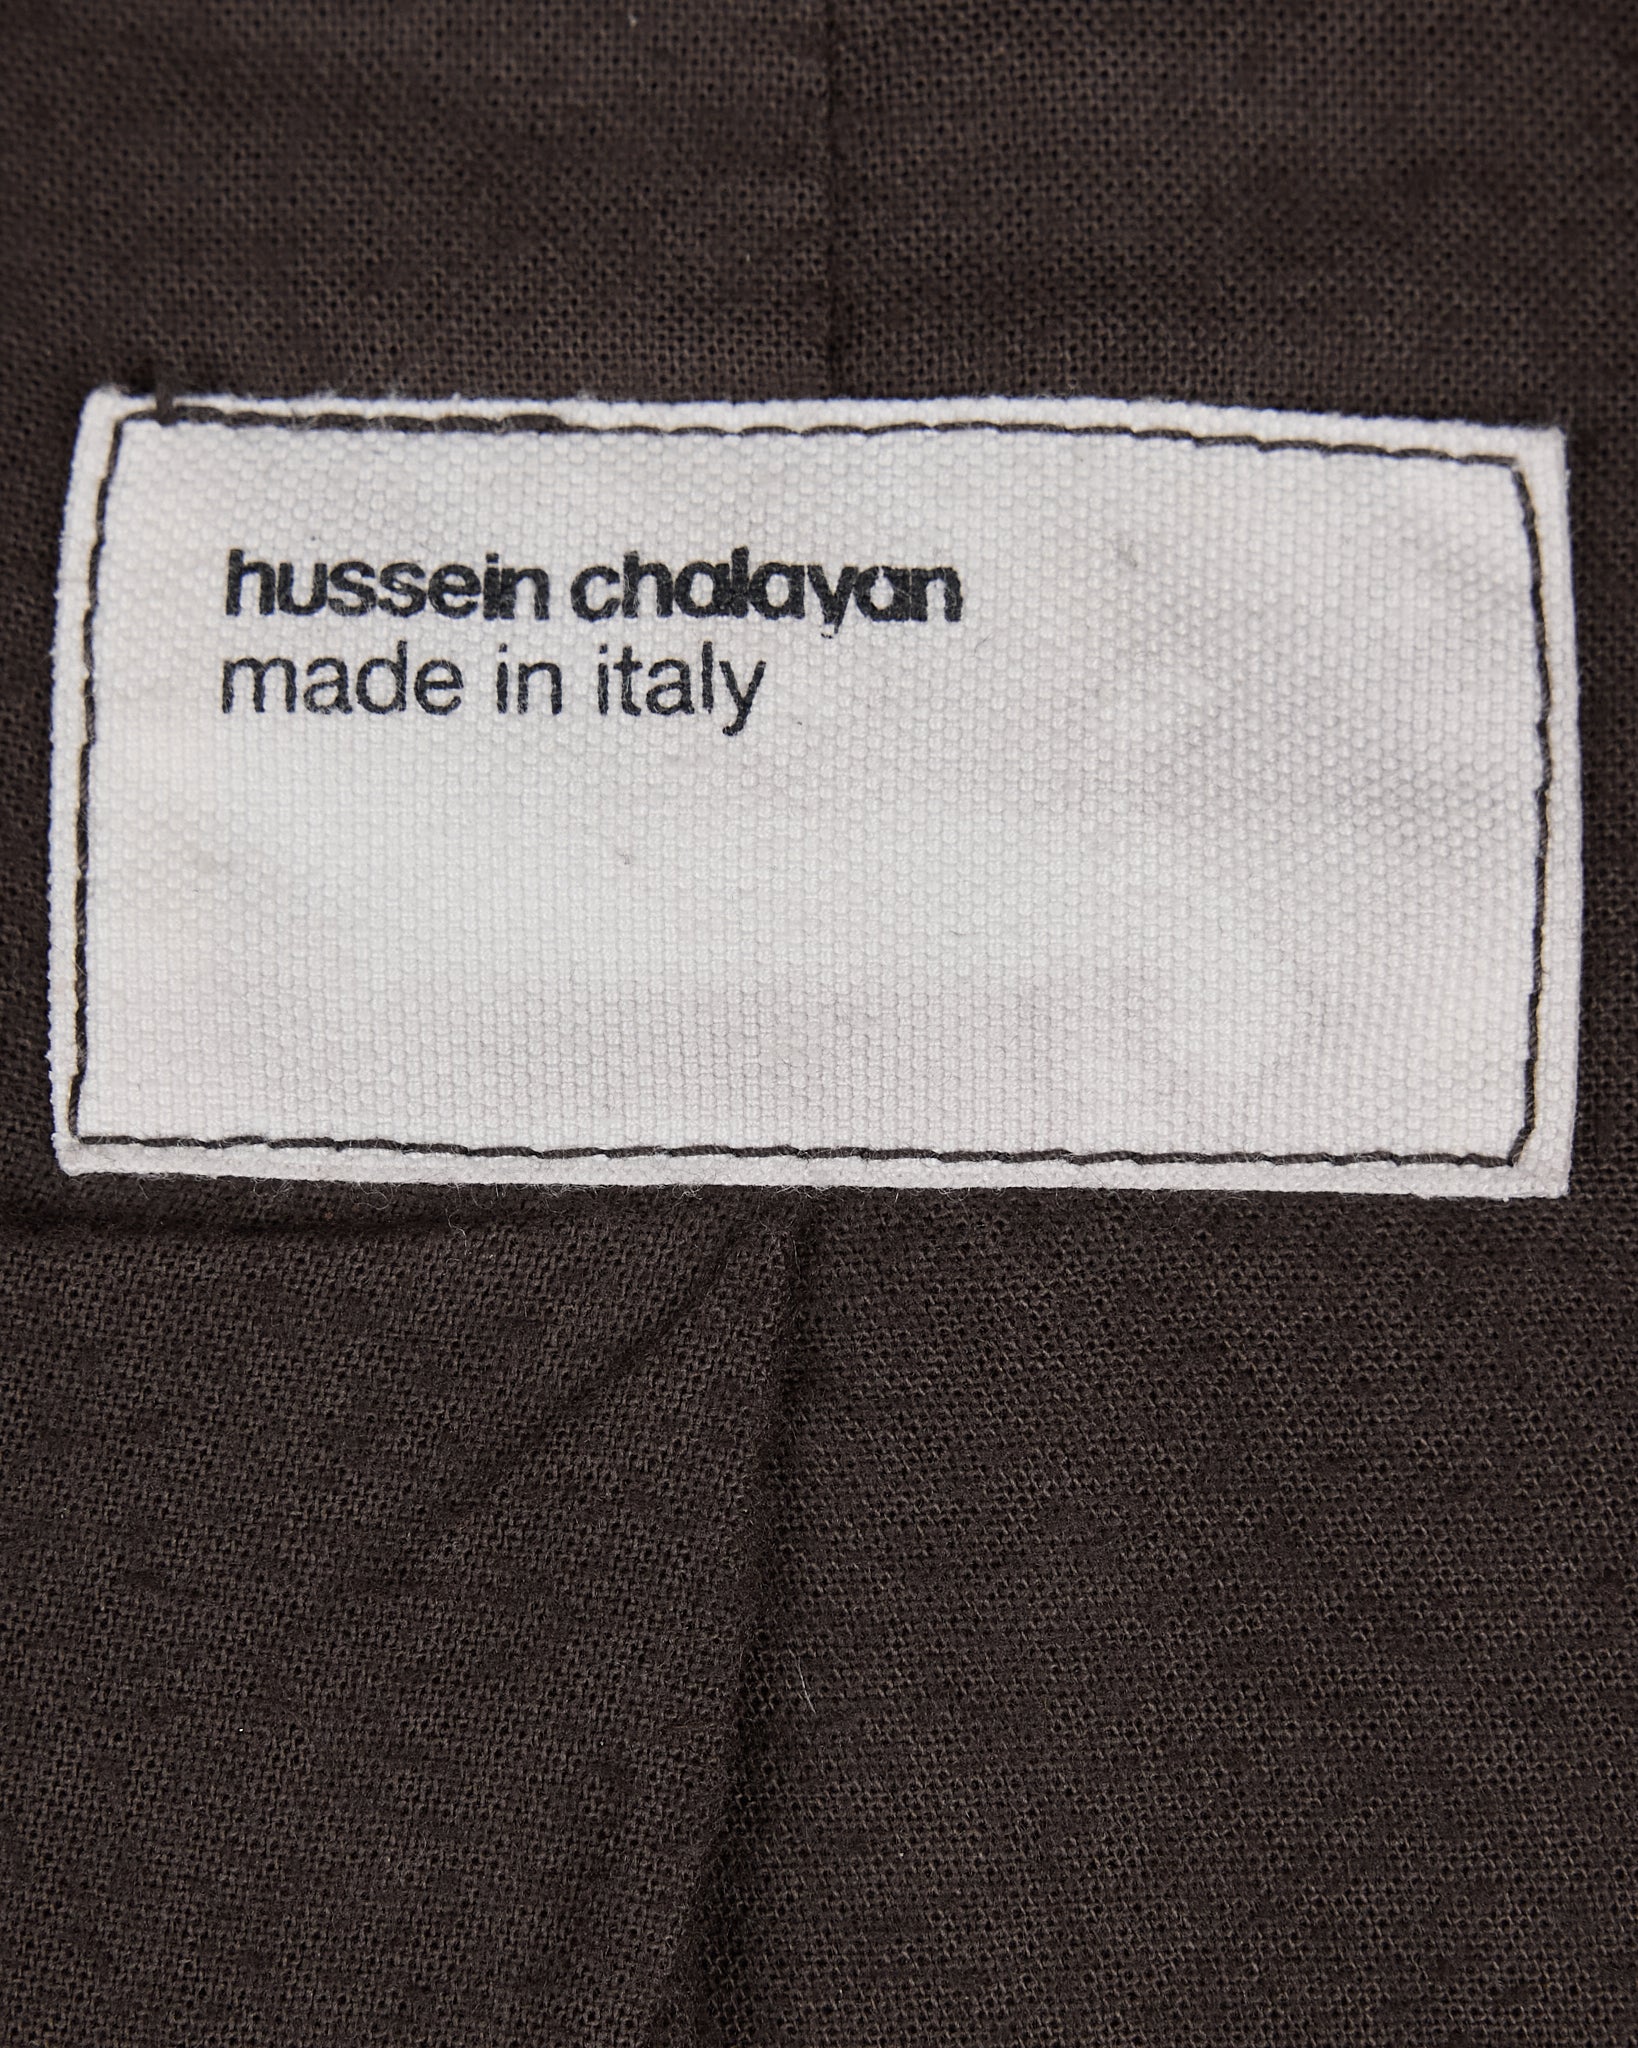 Hussein Chalayan Brown Field Jacket - AW05 "In Shadows" tag photo